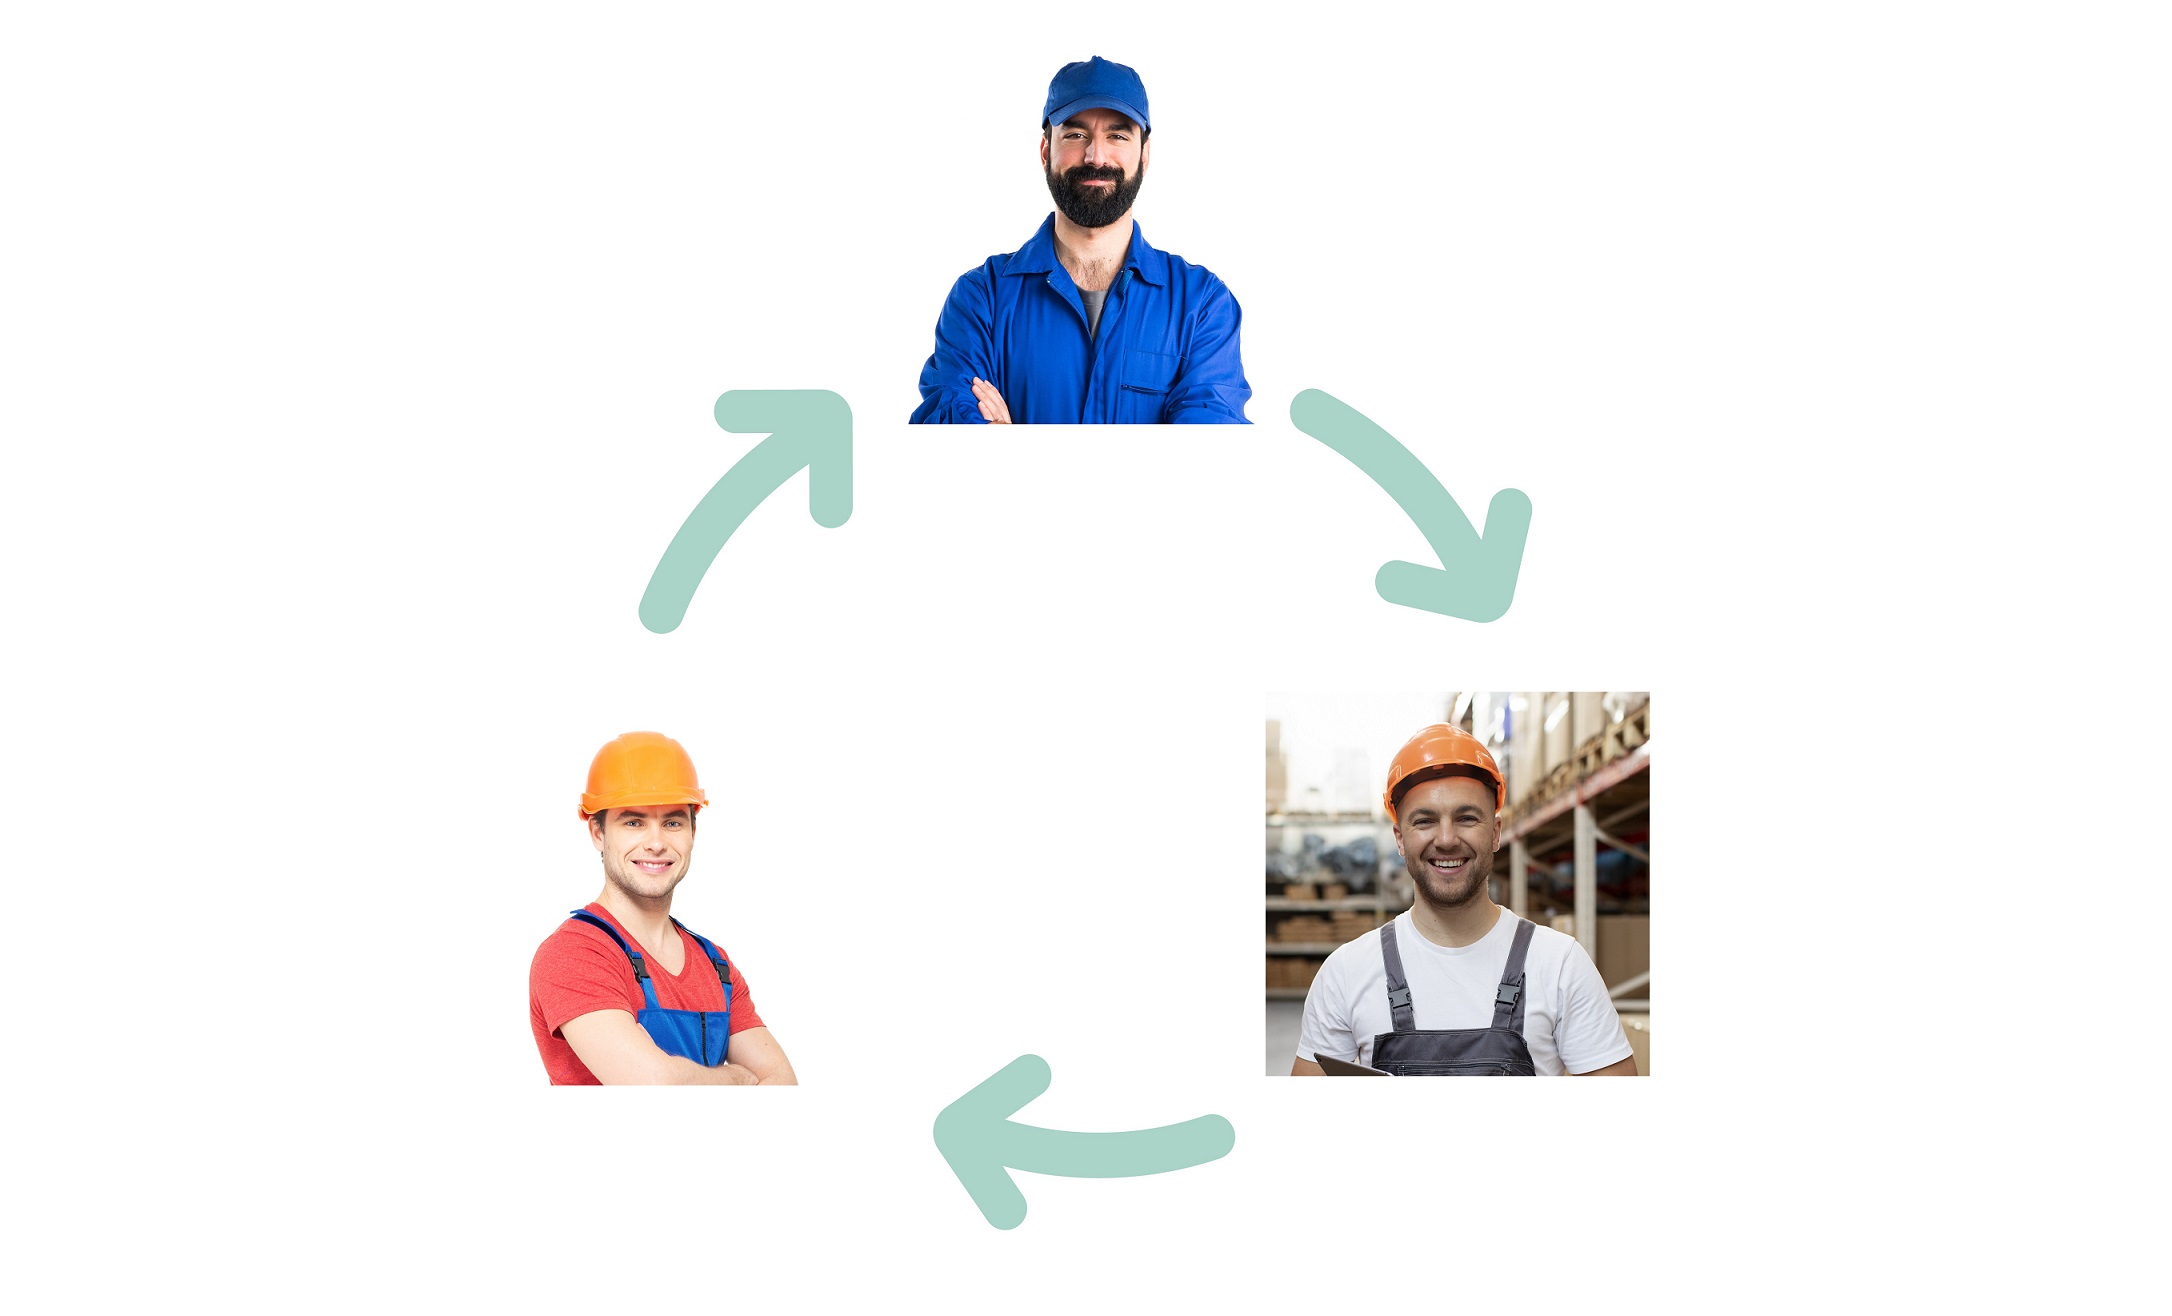 Worker rotation